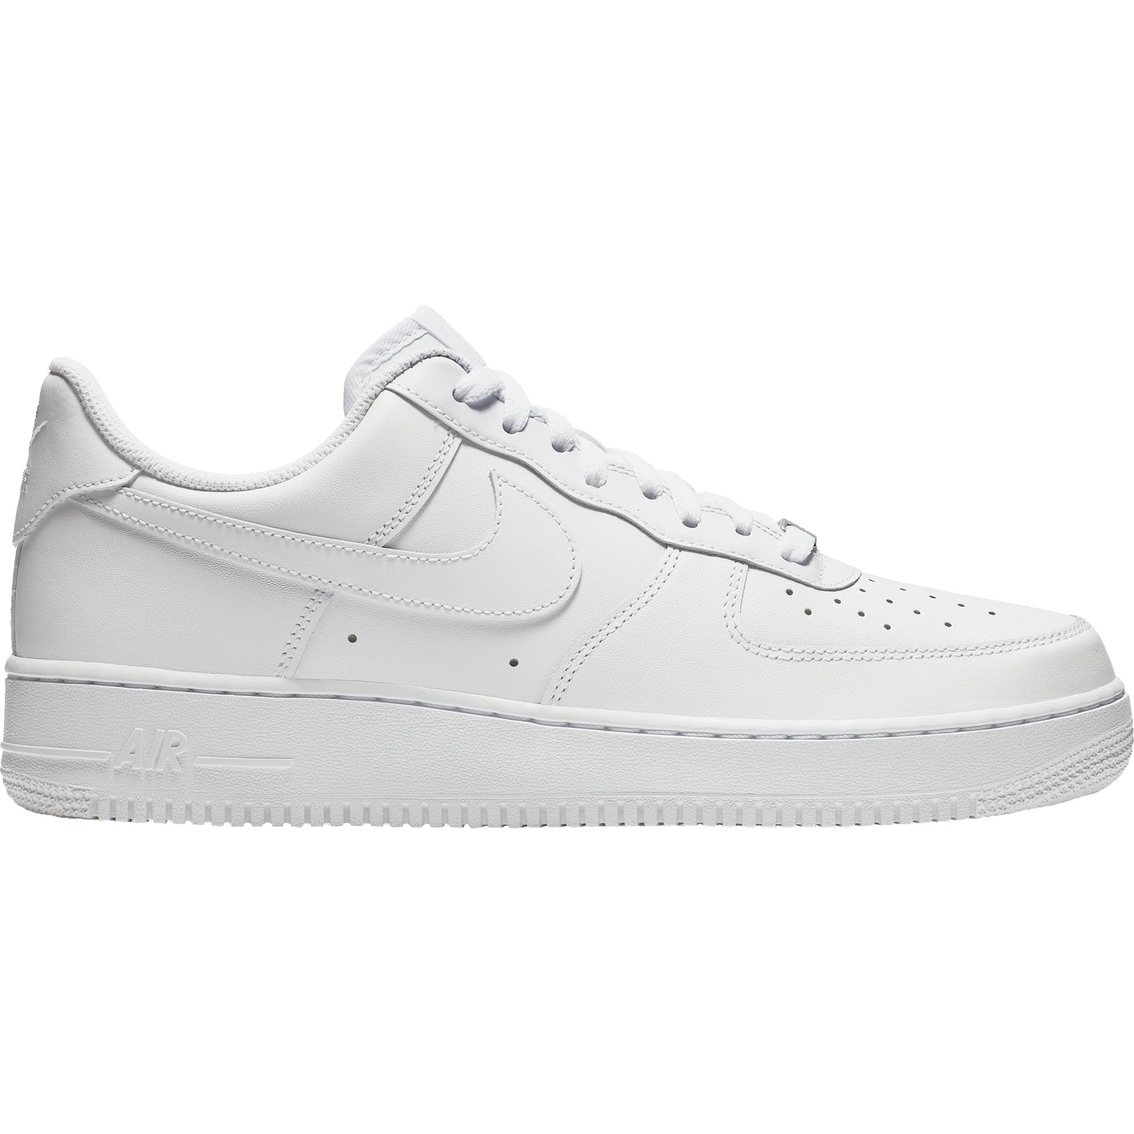 Nike Men's Air Force 1 07 Shoes - Image 3 of 8